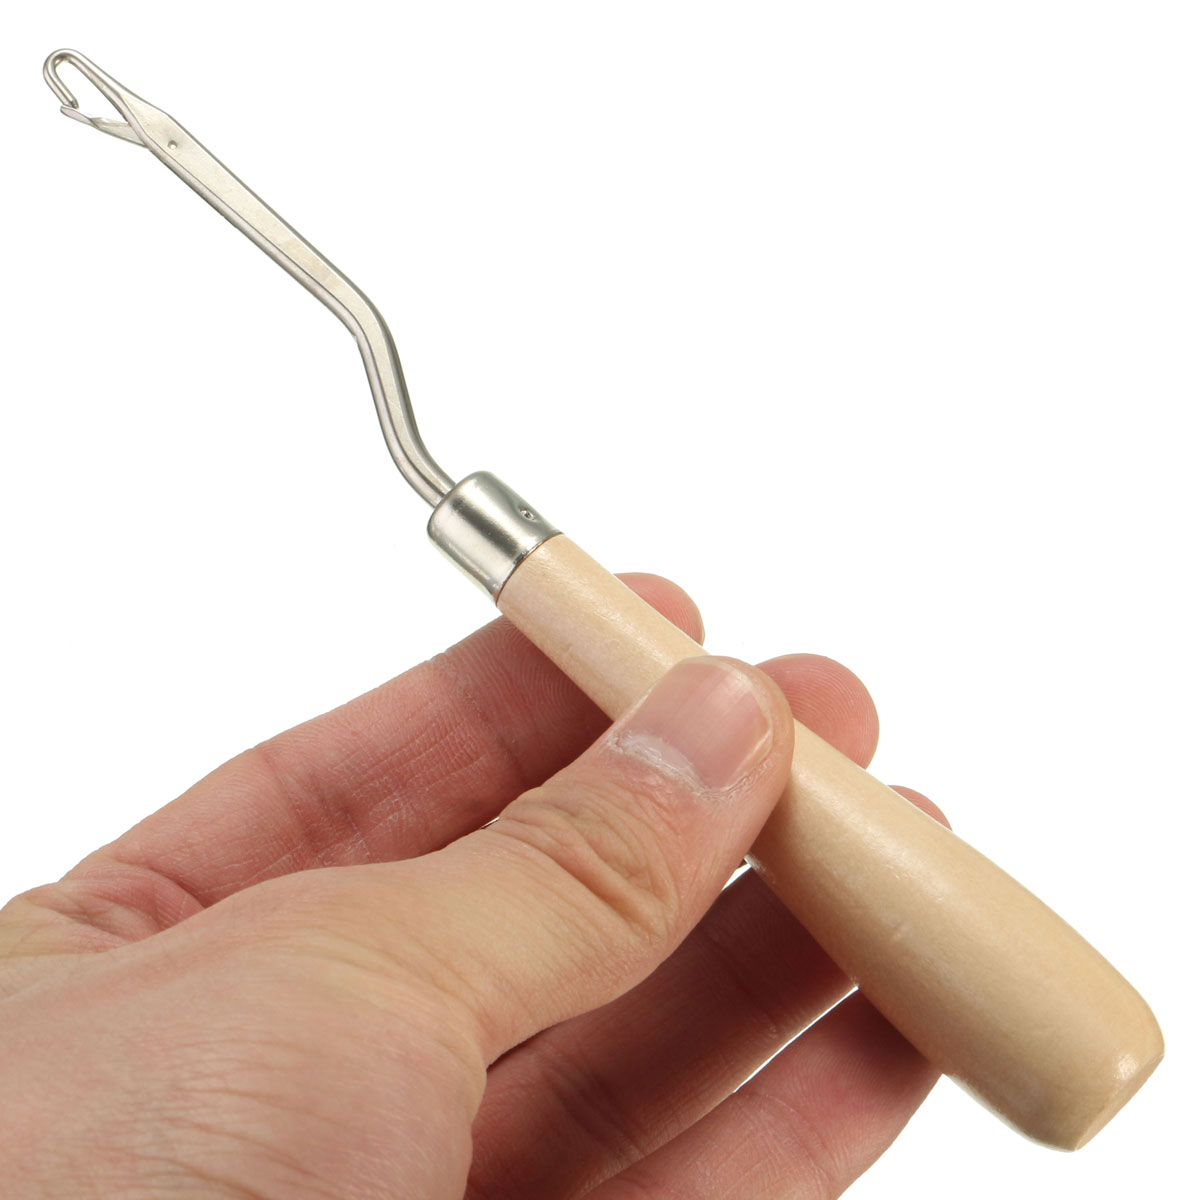 Wooden-Handle-Crochet-Needle-Latch-Hook-Puller-Tool-For-Canvas-Rug-Mats-Making-1041374-3